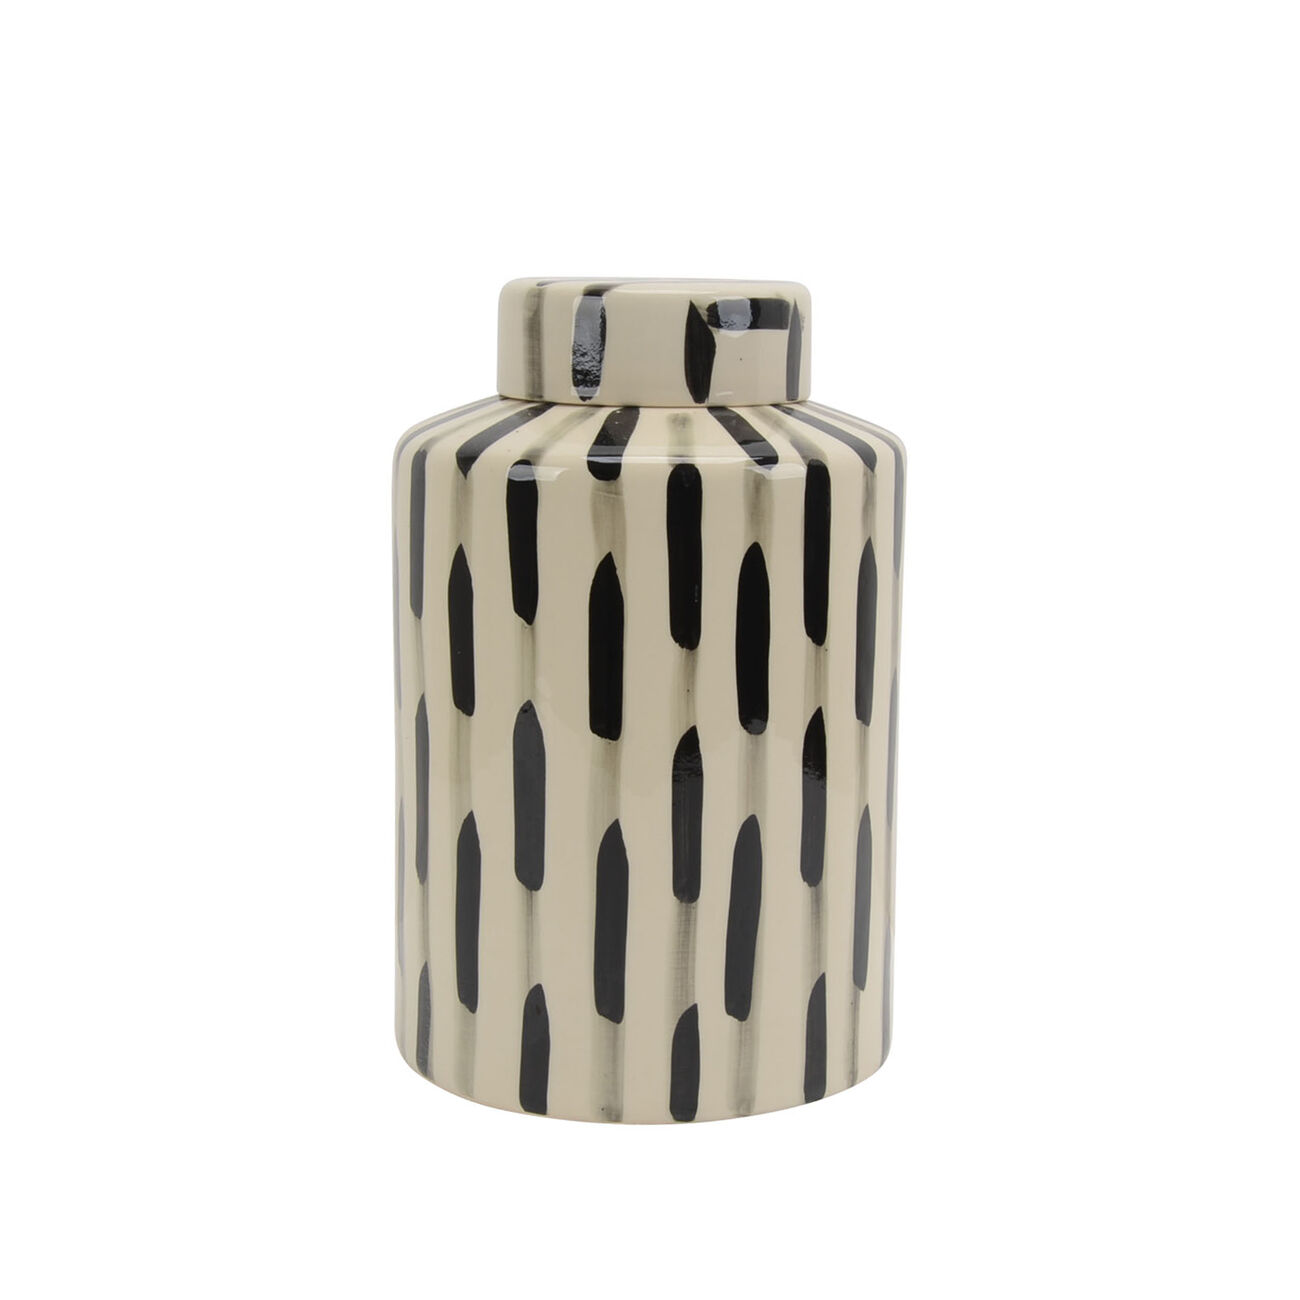 Ceramic Lidded Jar with Textured Outer Surface, Black and White